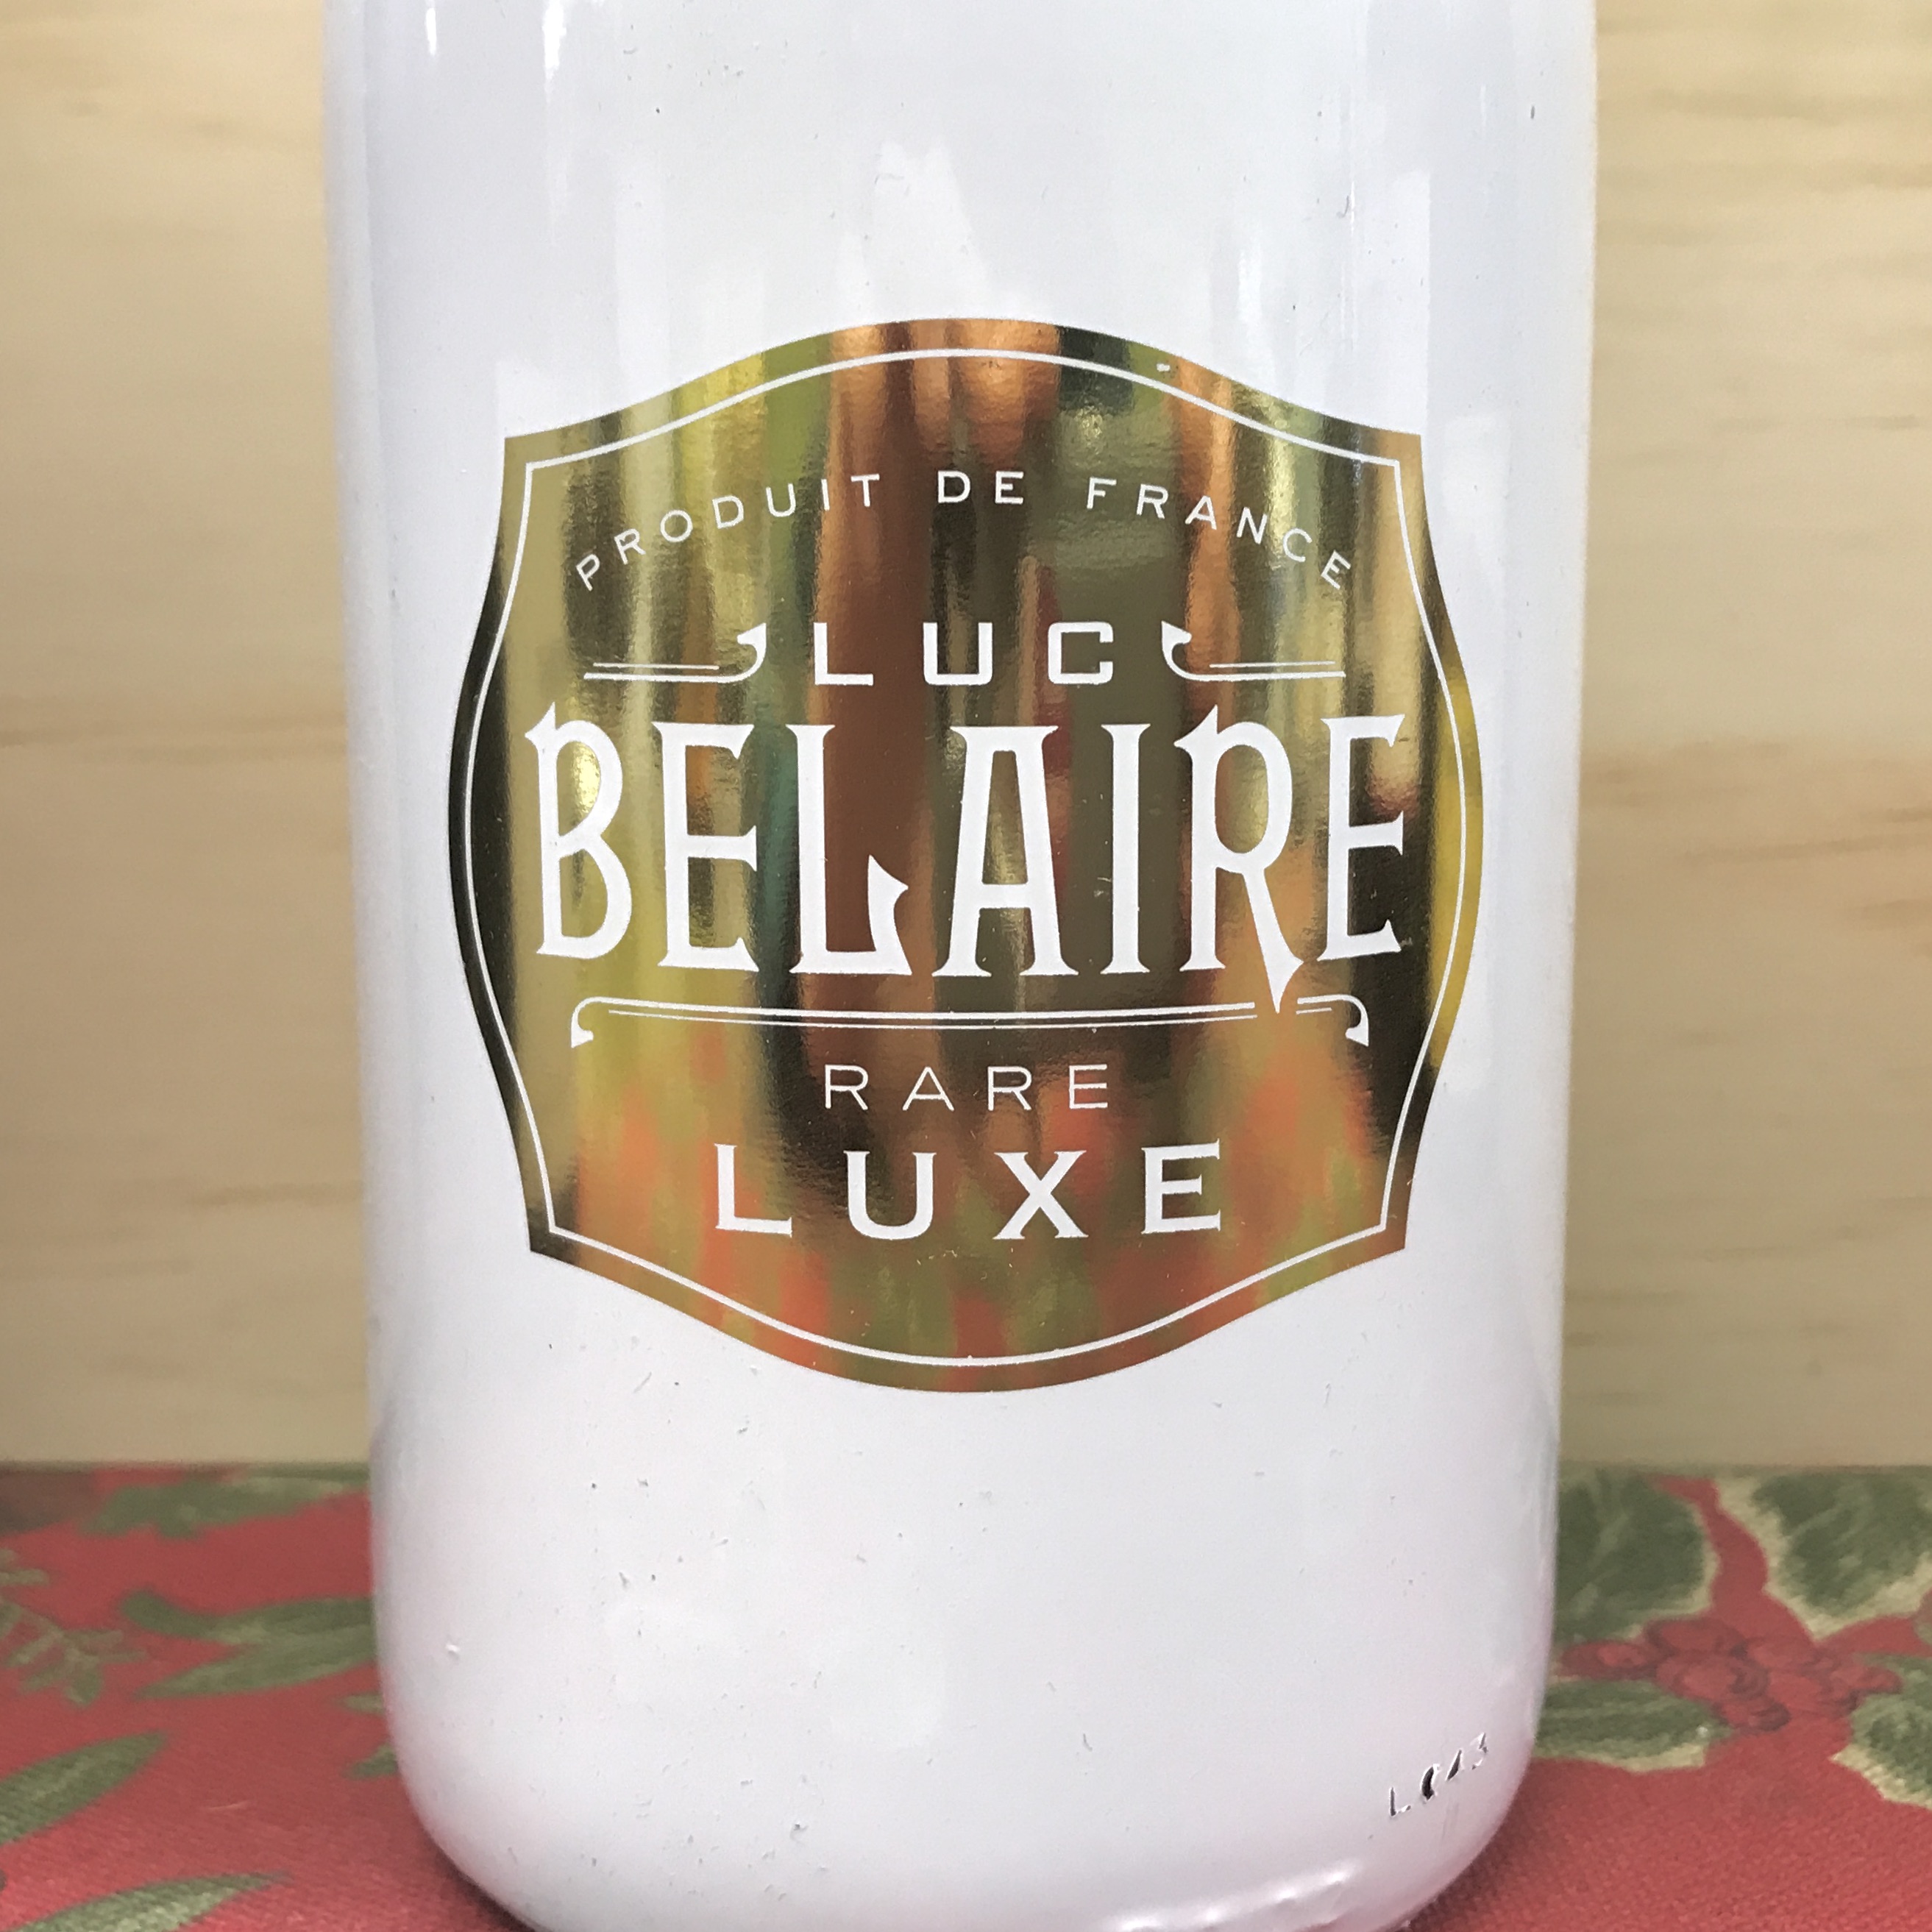 Luc Belaire Rare Luxe sparkling wine